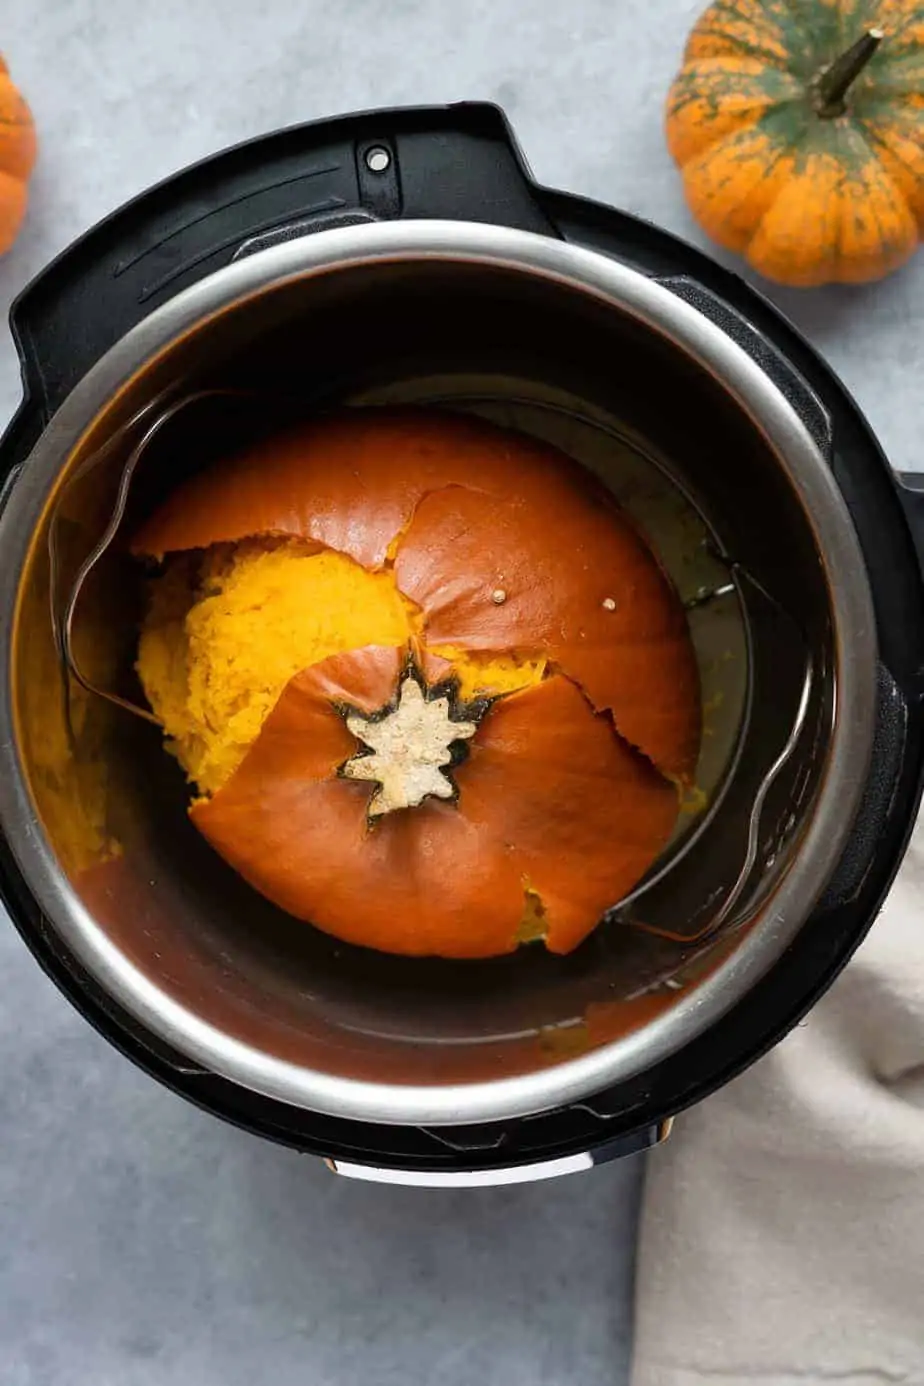 After pressure cooking the pumpkin to make puree.